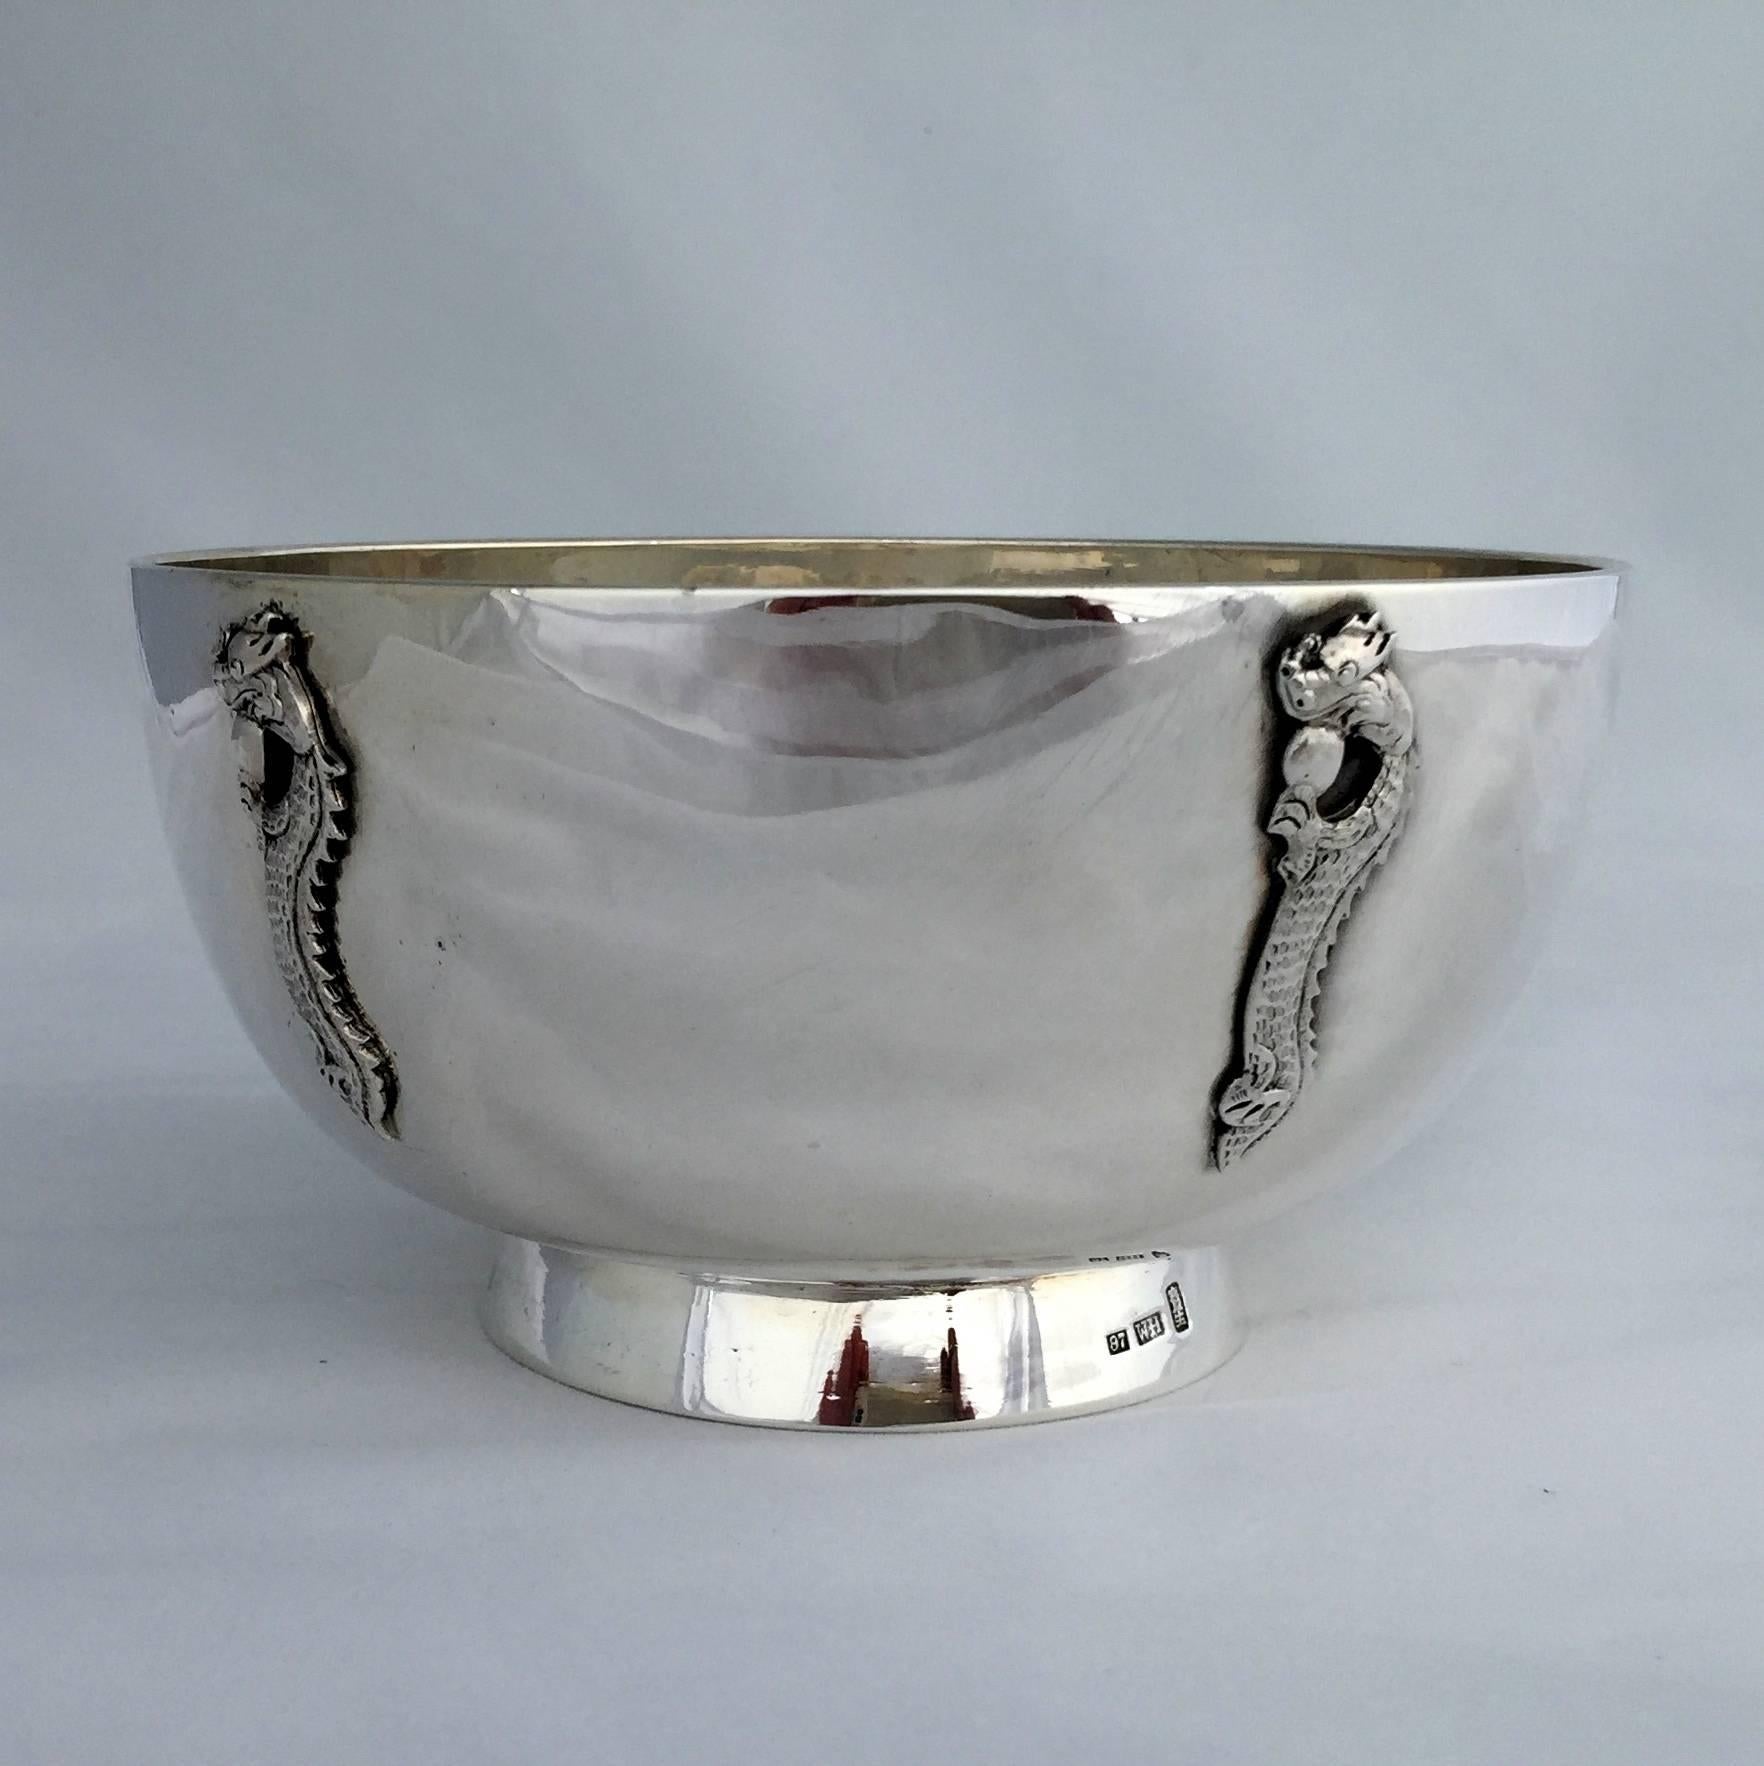 Appliqué Chinese Export Silver Polished Bowl with Applied Vertical Dragons by Wang Hing